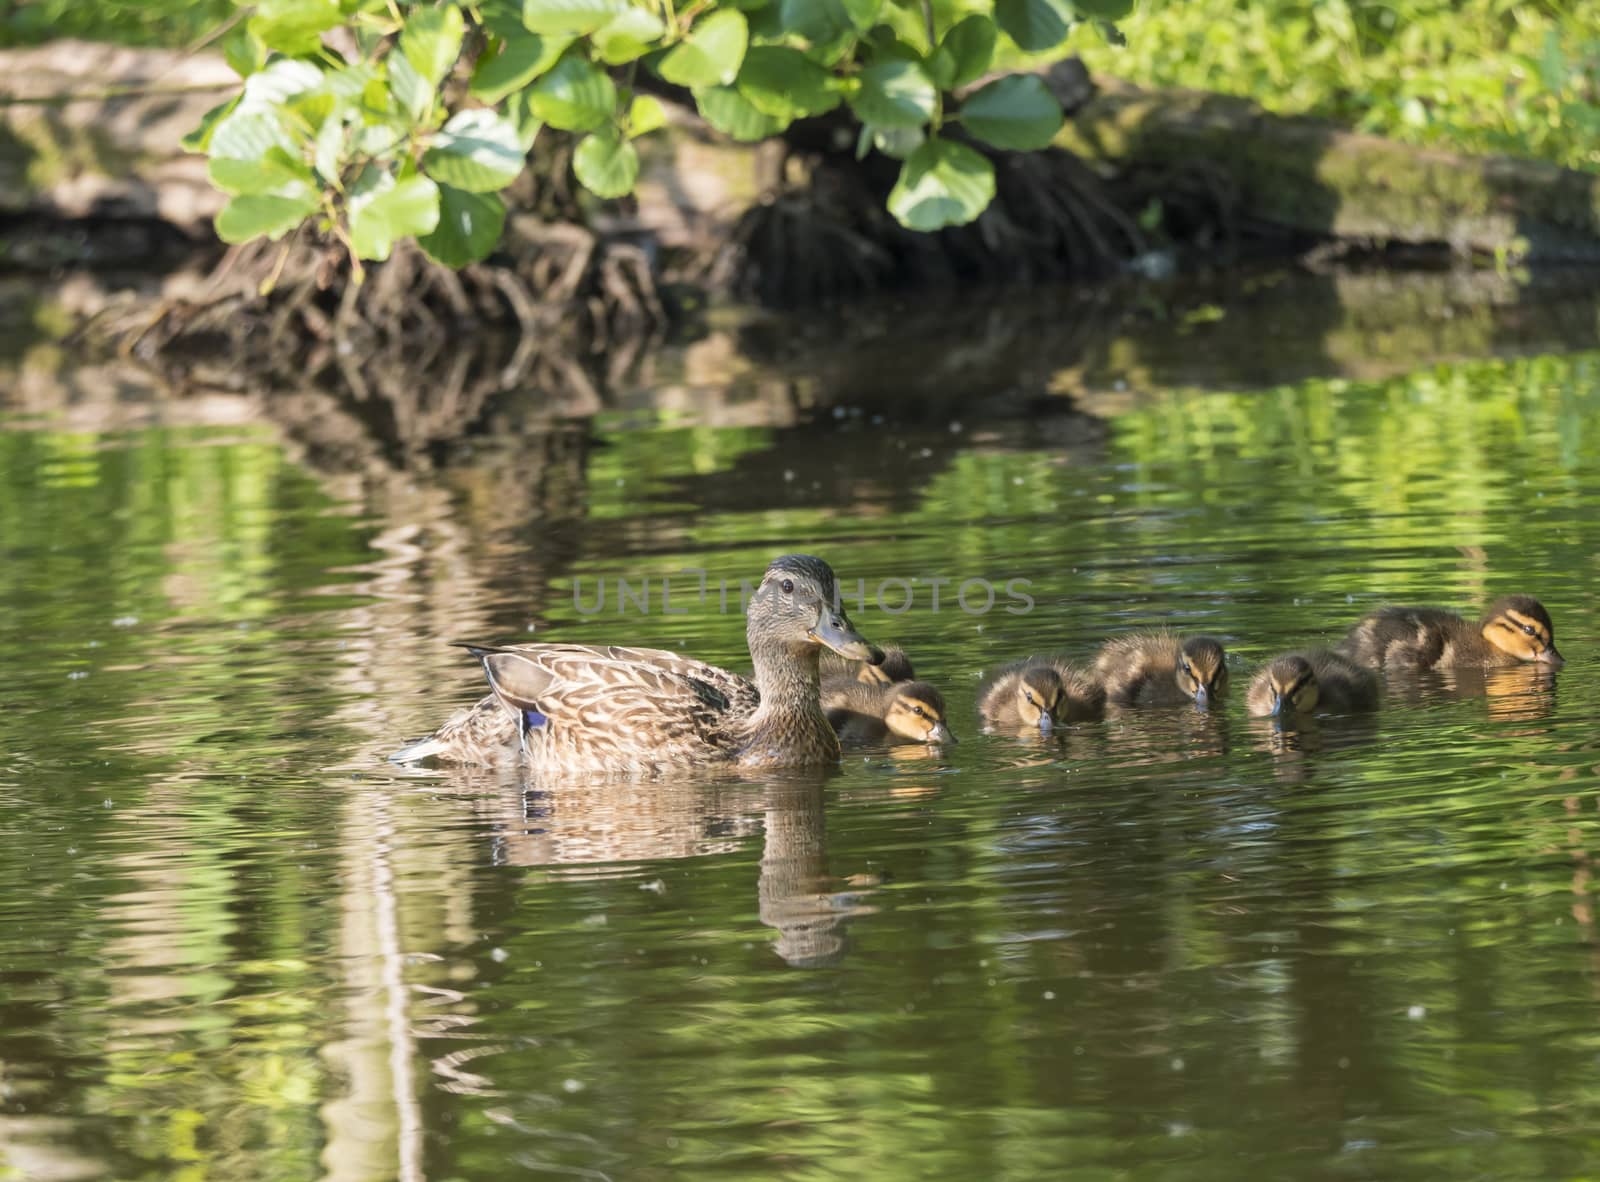 Wild Female Mallard duck with youngs ducklings. Anas platyrhynchos. Beauty in nature. Spring time golden hour. Birds swimming on lake. Young ones